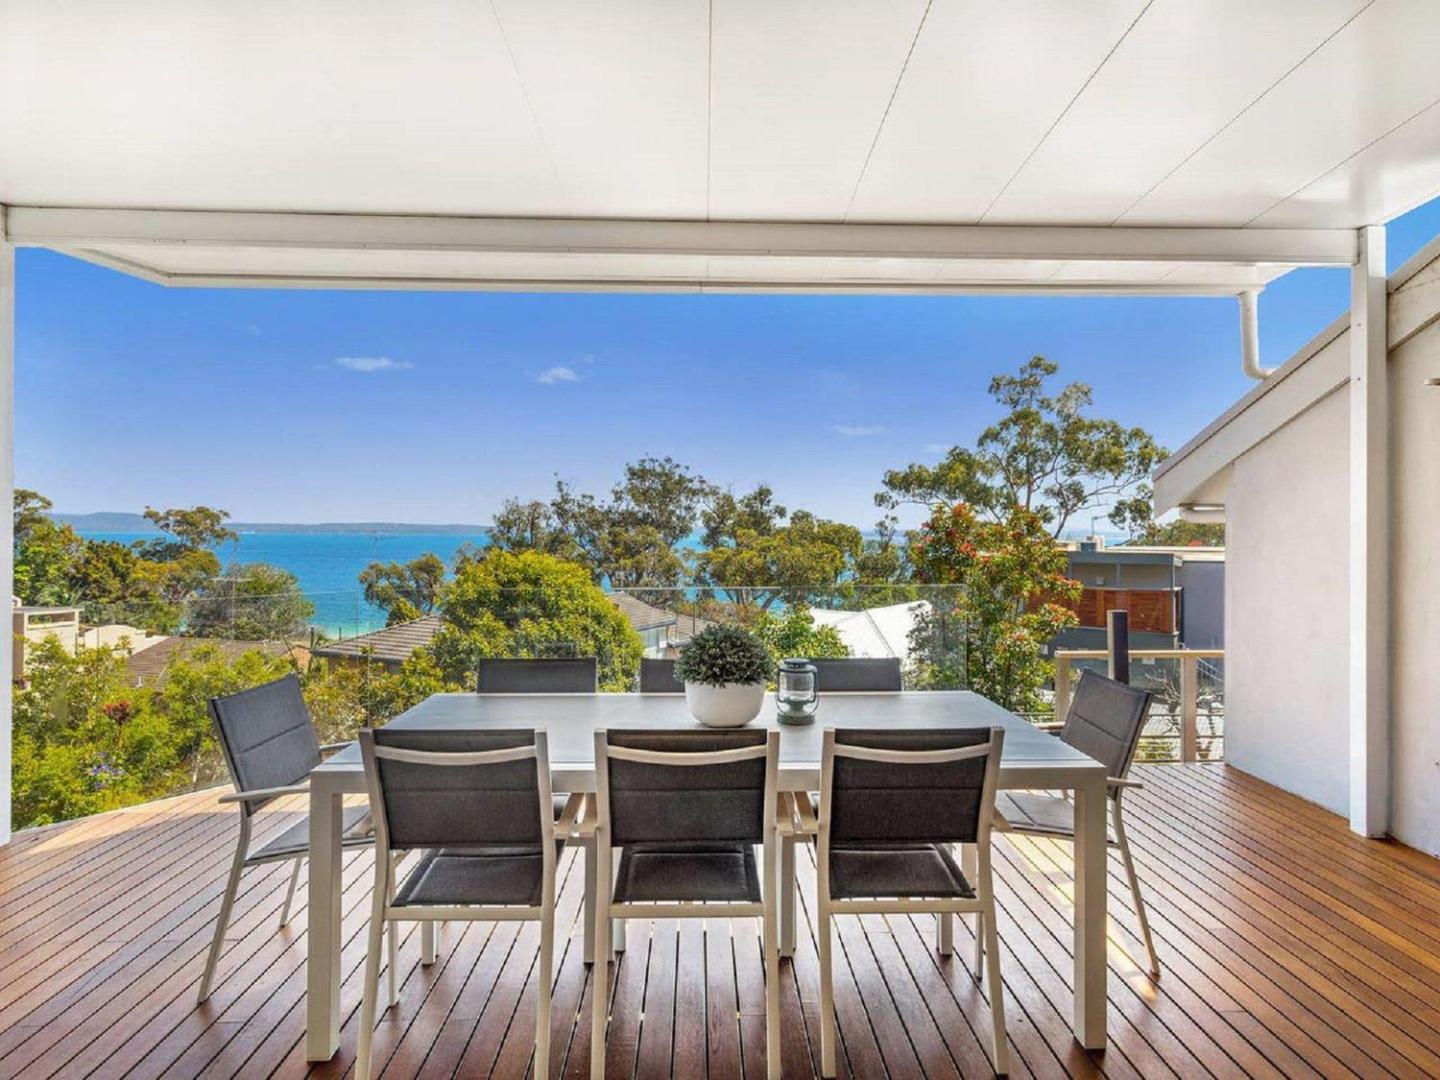 ‘Nunkeri’, 5 Kerrie Close – Stunning House with Fabulous Views, Linen, WIFI & Air Conditioning